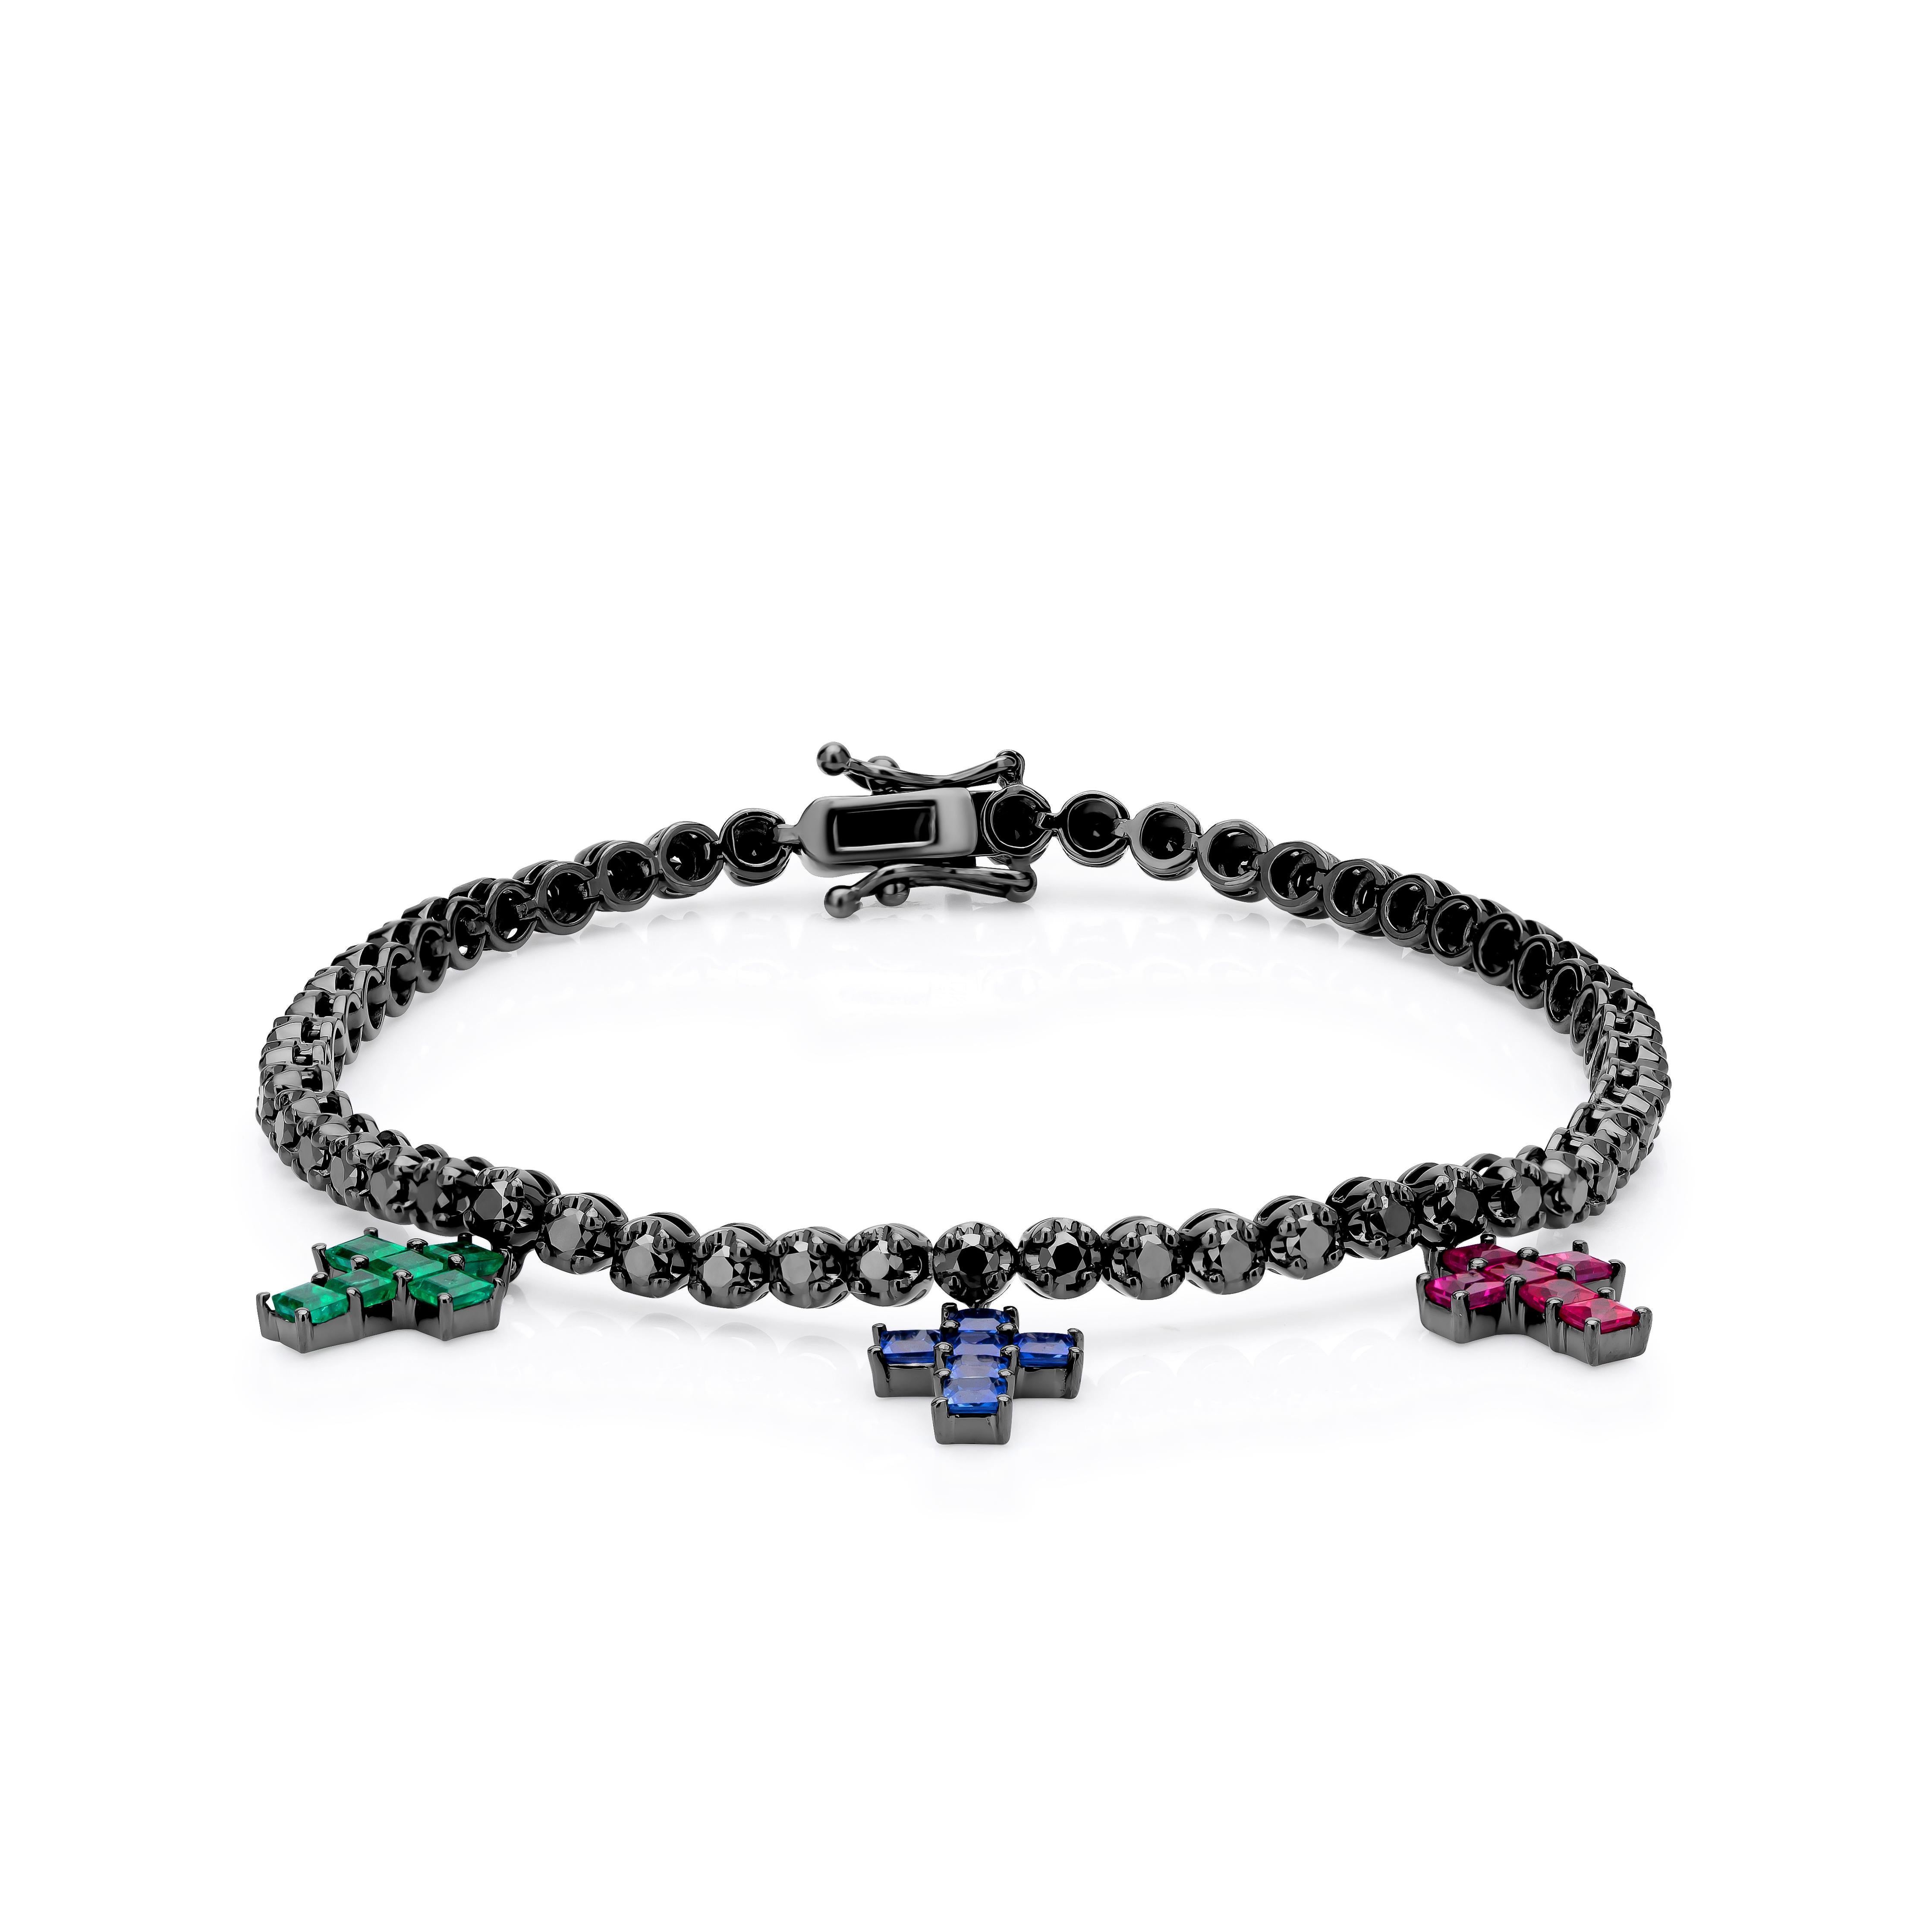 Exhibit radiance on any occasion with this gemstone studded bracelet by Gemistry, having a total diamond weight of 1.98 cwt. The majestic black diamonds are intertwined with square-cut elegant emerald, breathtaking blue sapphire, and regal ruby